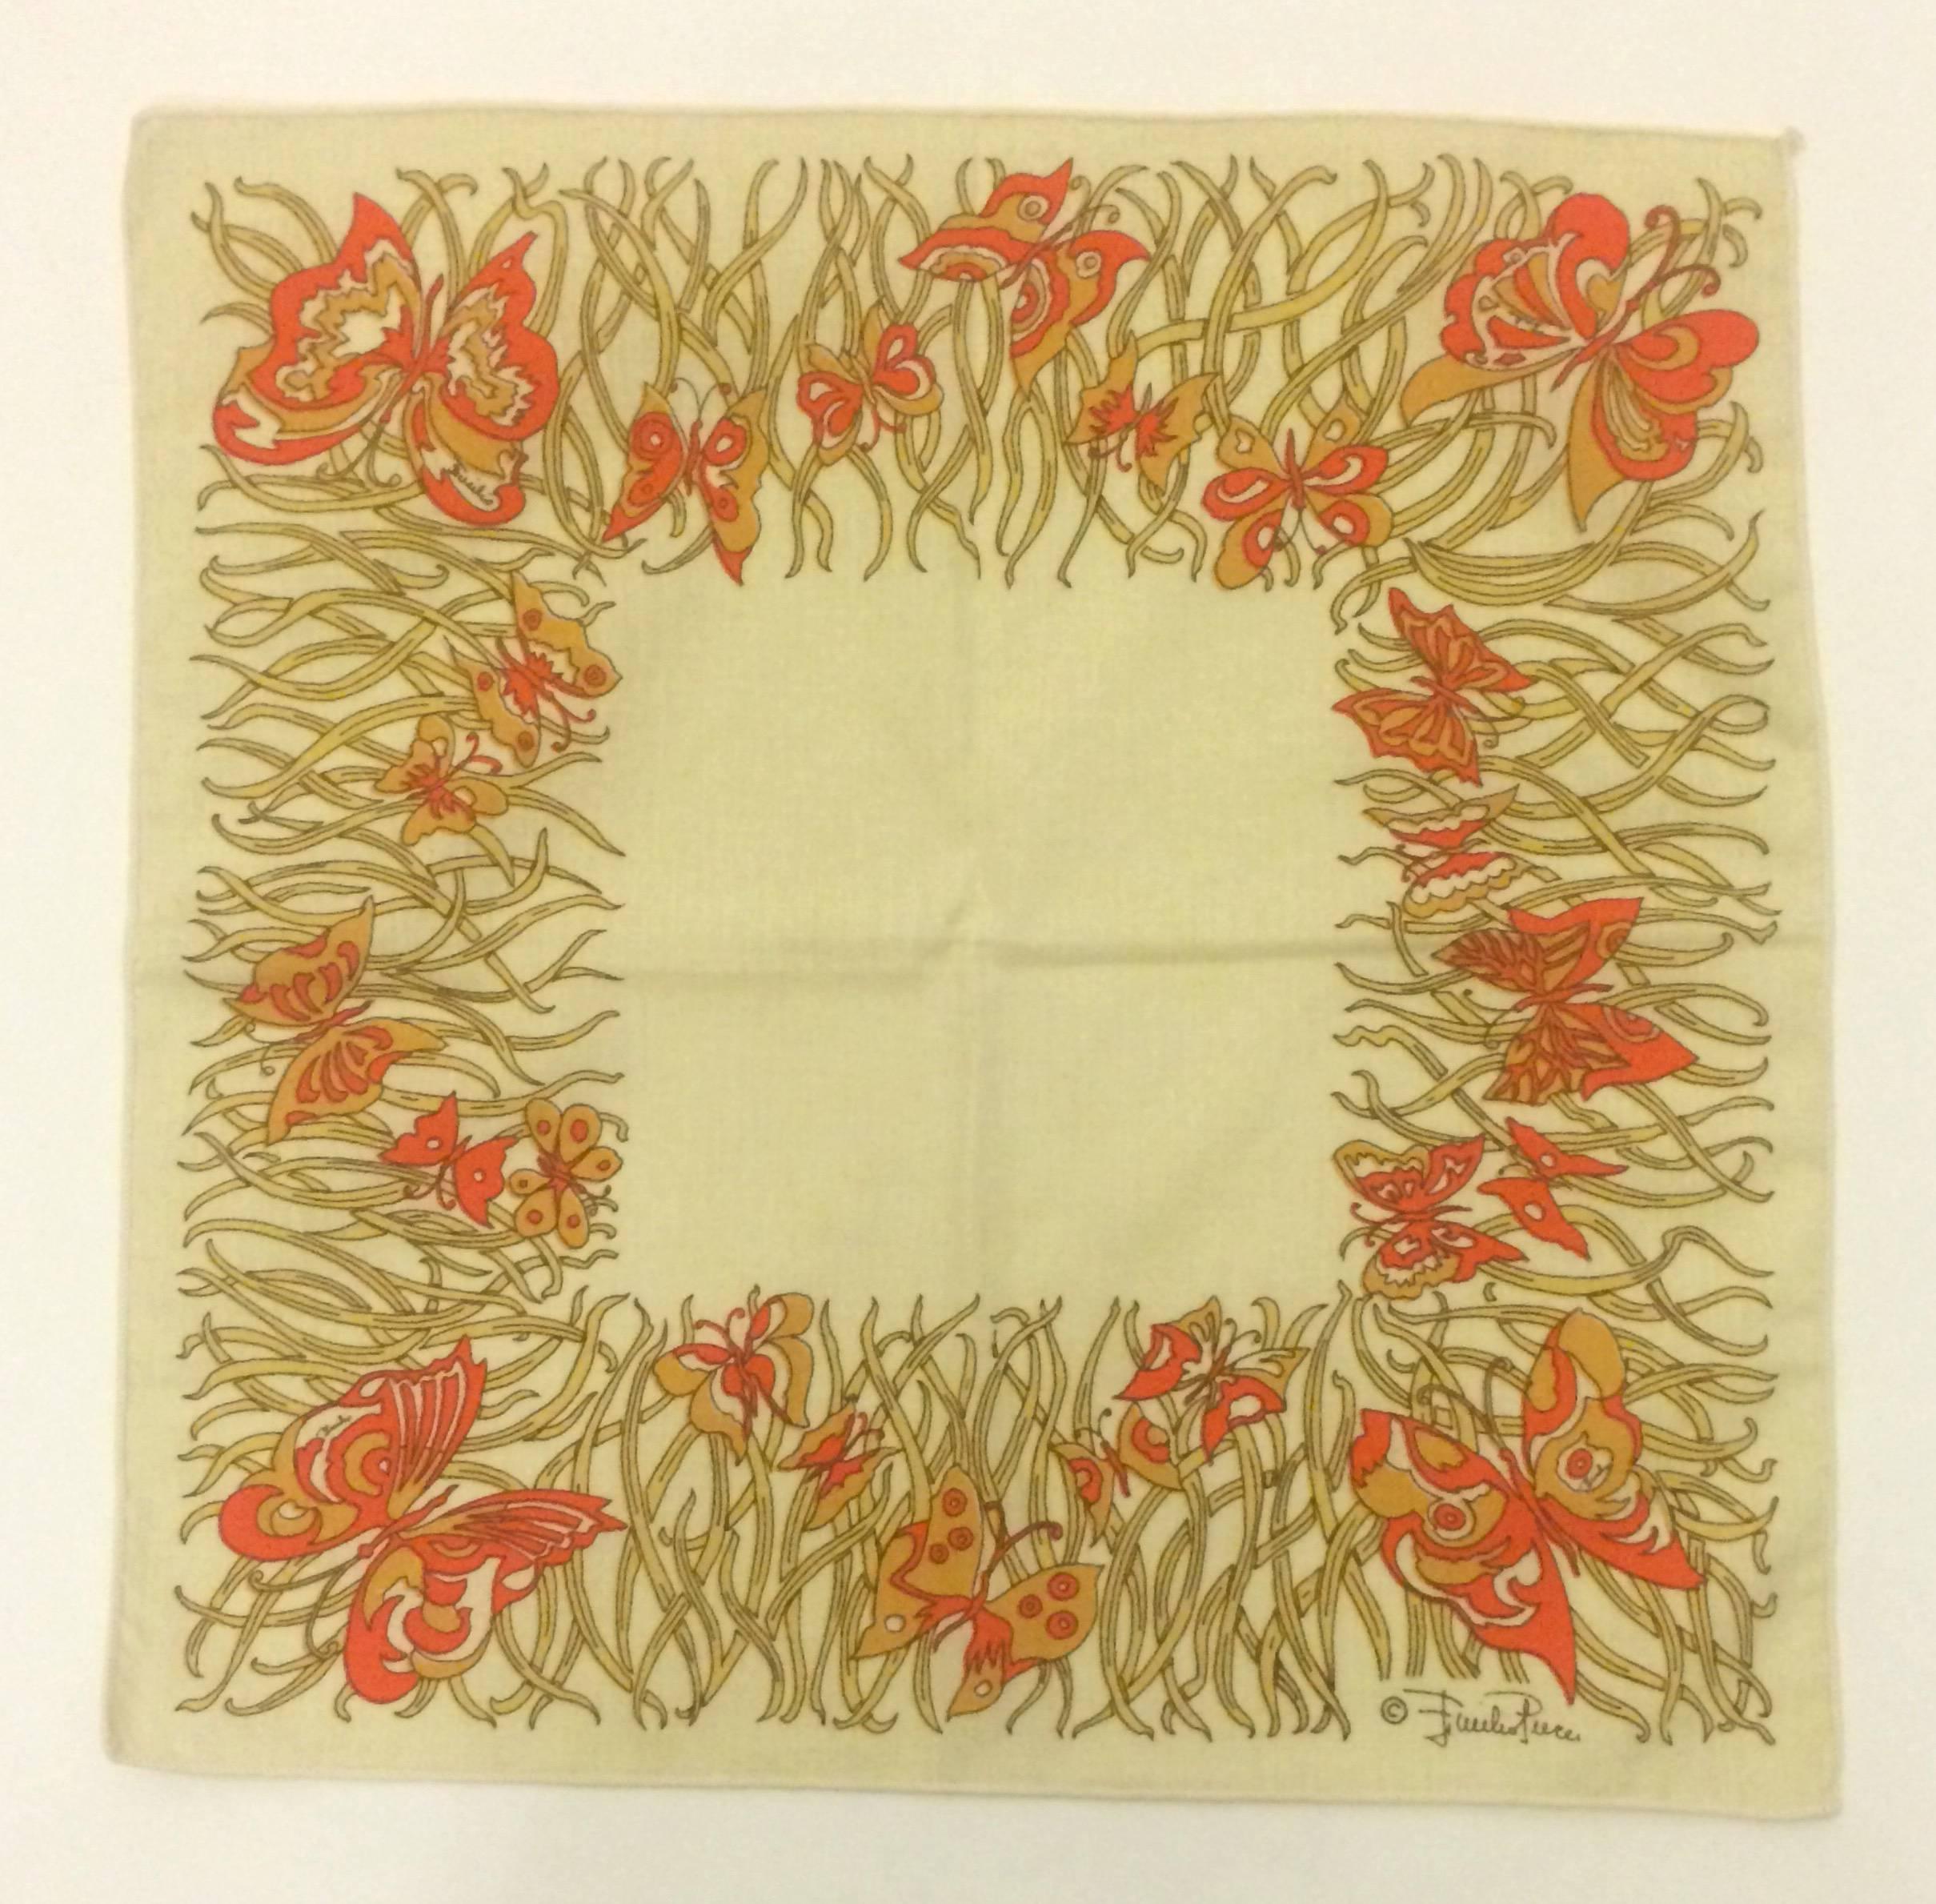 Emilio Pucci 1970s cream and orange butterfly print cloth napkins. Set of four.

Signed 'Emilio Pucci' at corners and 'Emilio' throughout print.

Fabric content unknown, feels like a lightweight cotton/linen.

16 1/2